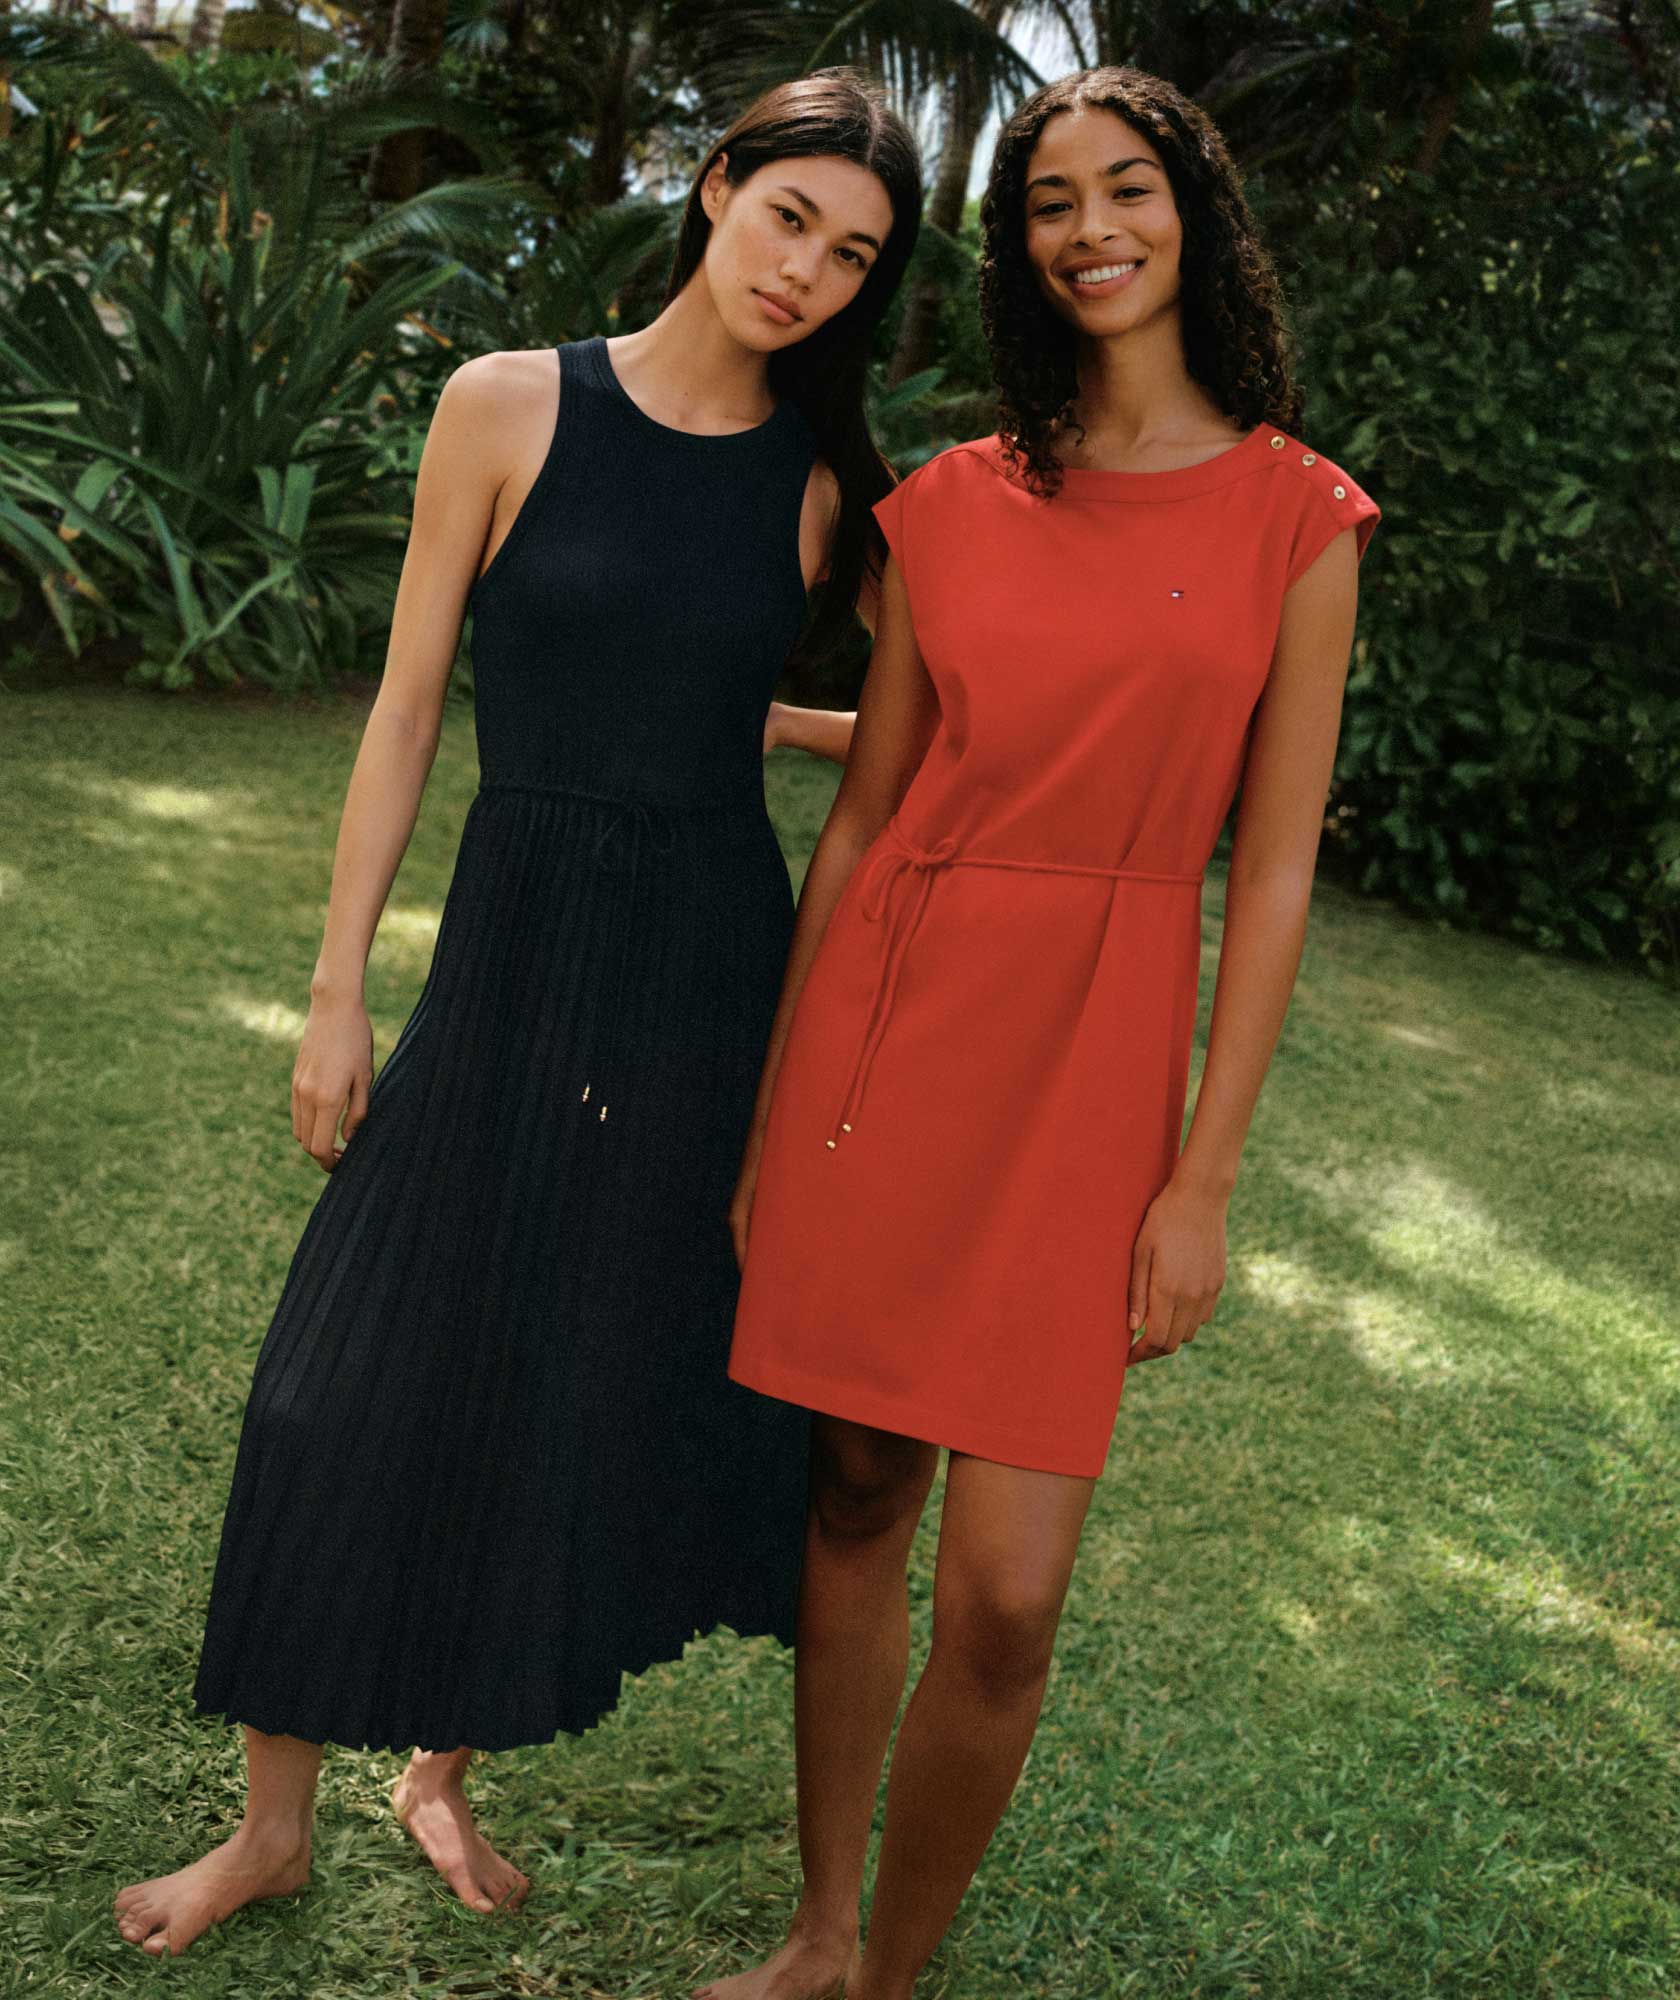 Two female models wear summer dresses from Tommy Hilfiger.